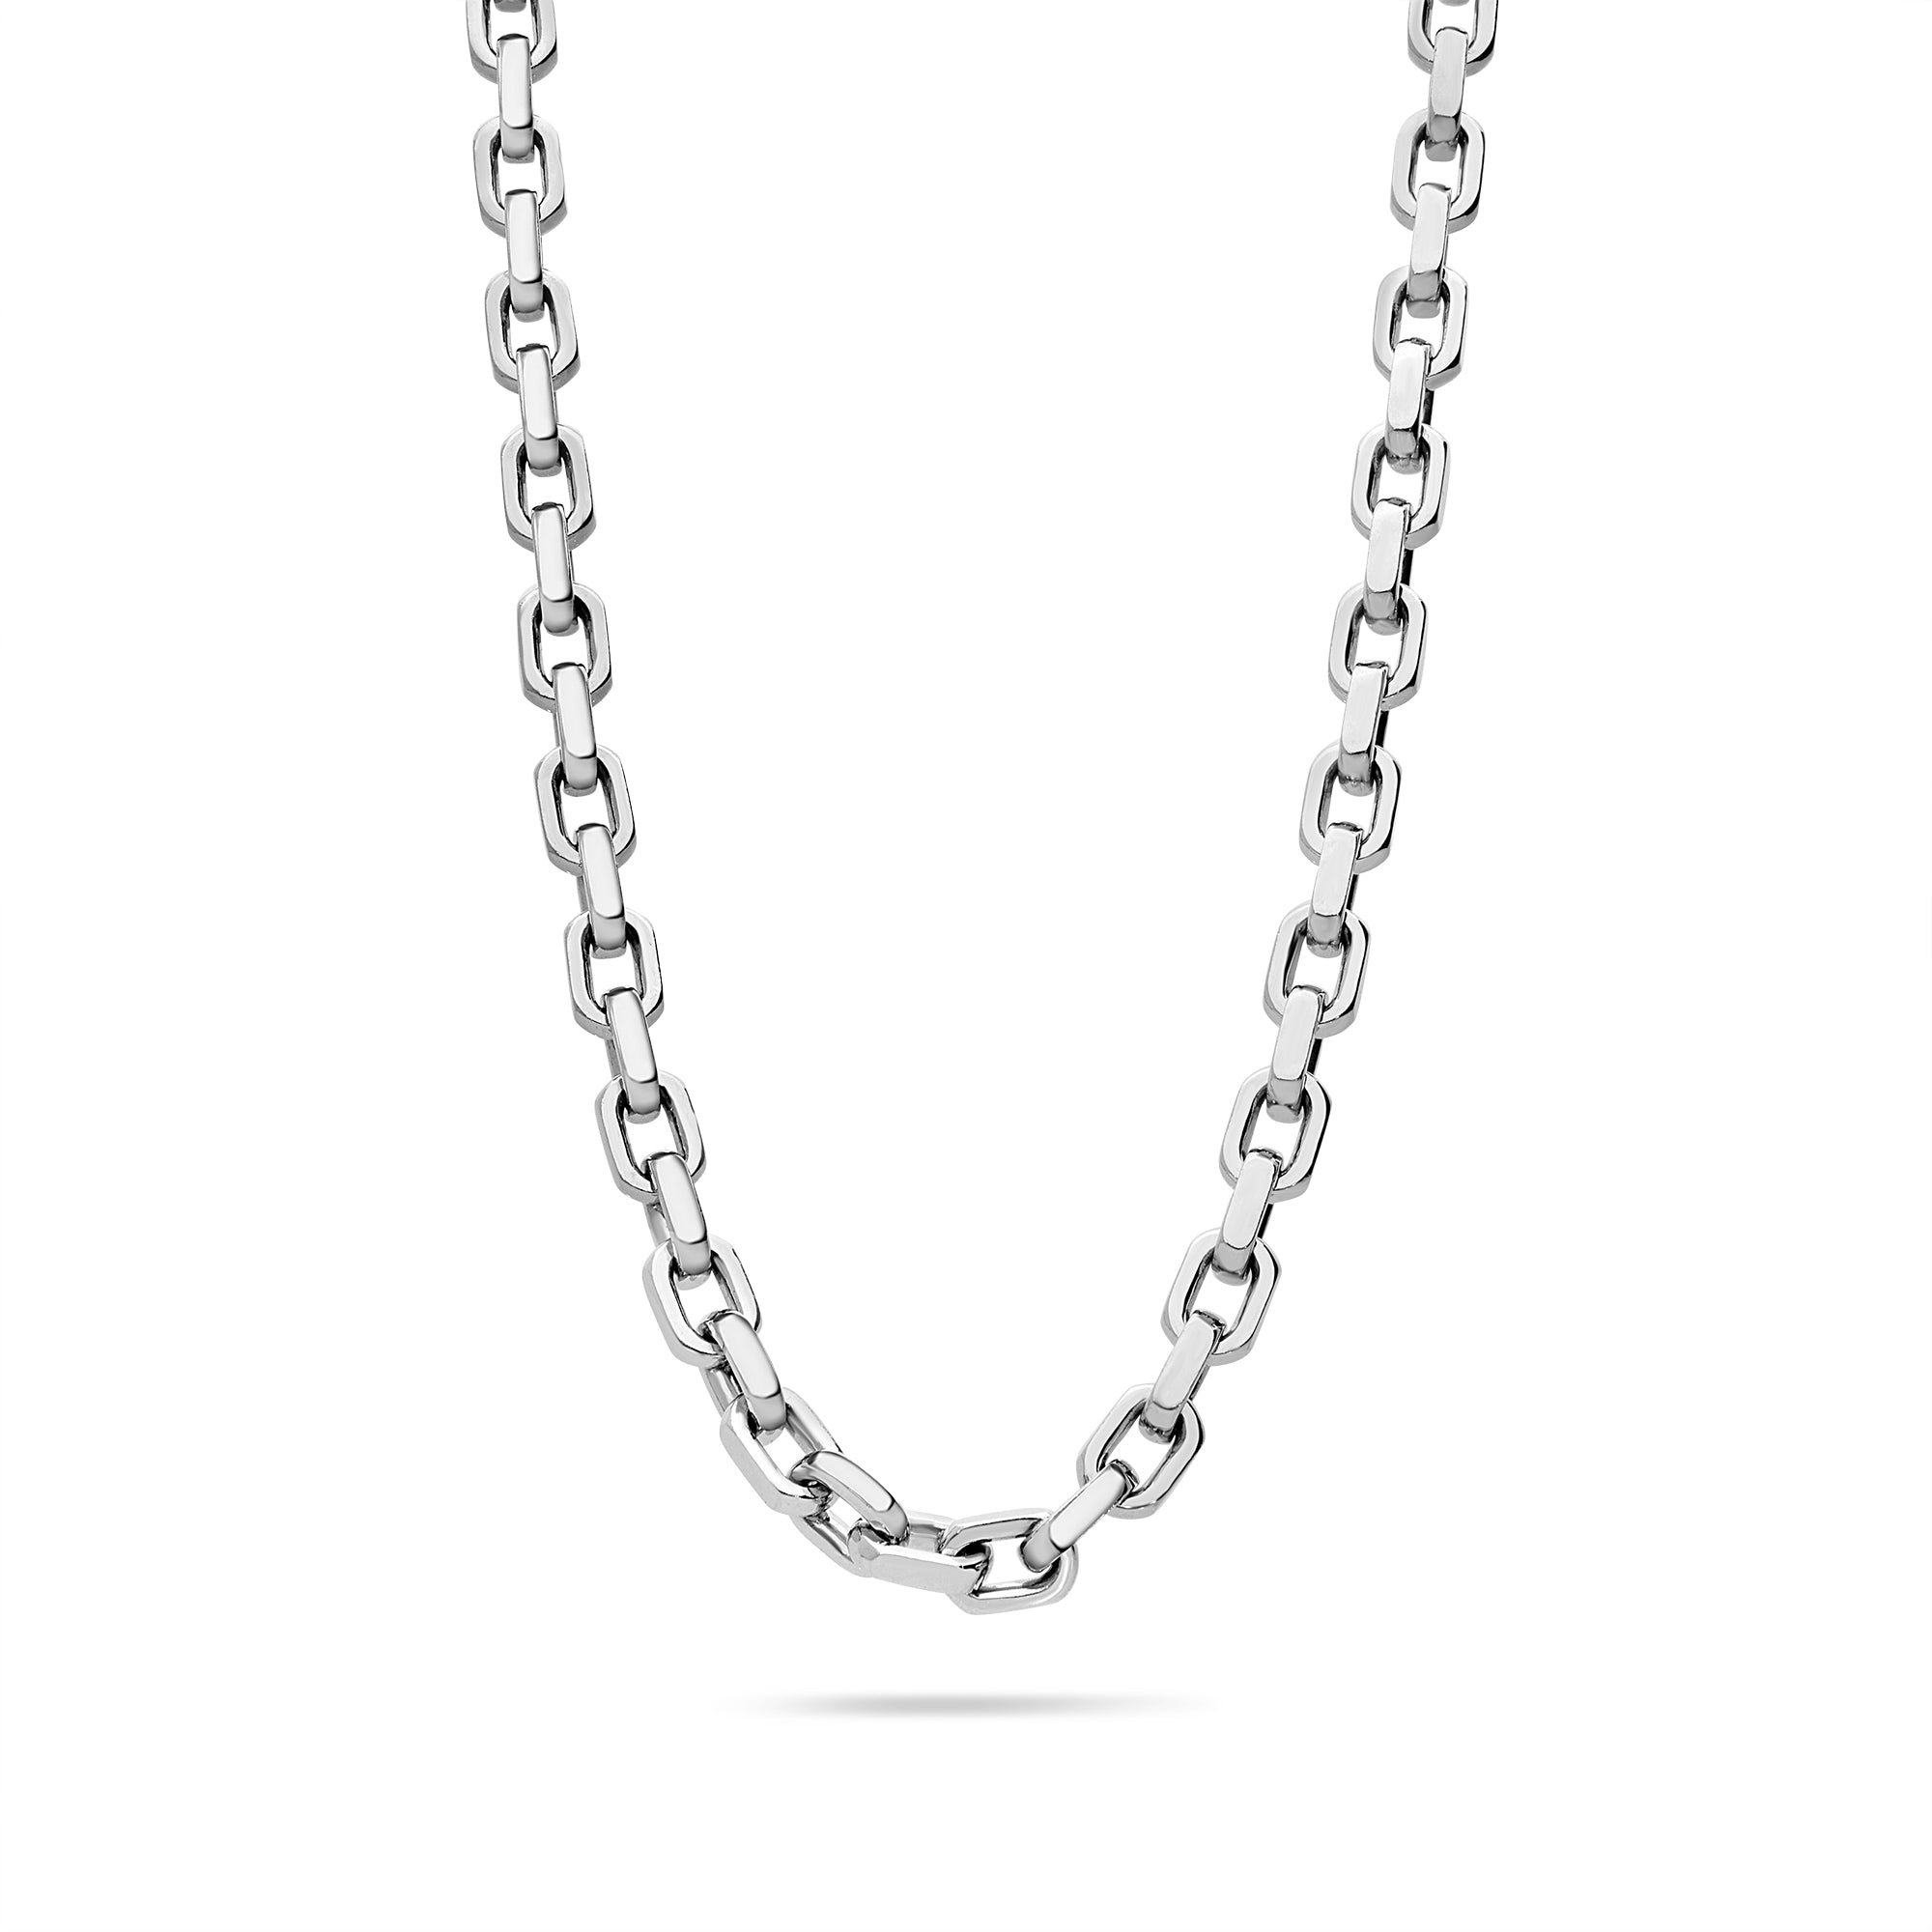 Gold Odin Link Chain (6mm) (14K WHITE GOLD) - IF & Co. Custom Jewelers